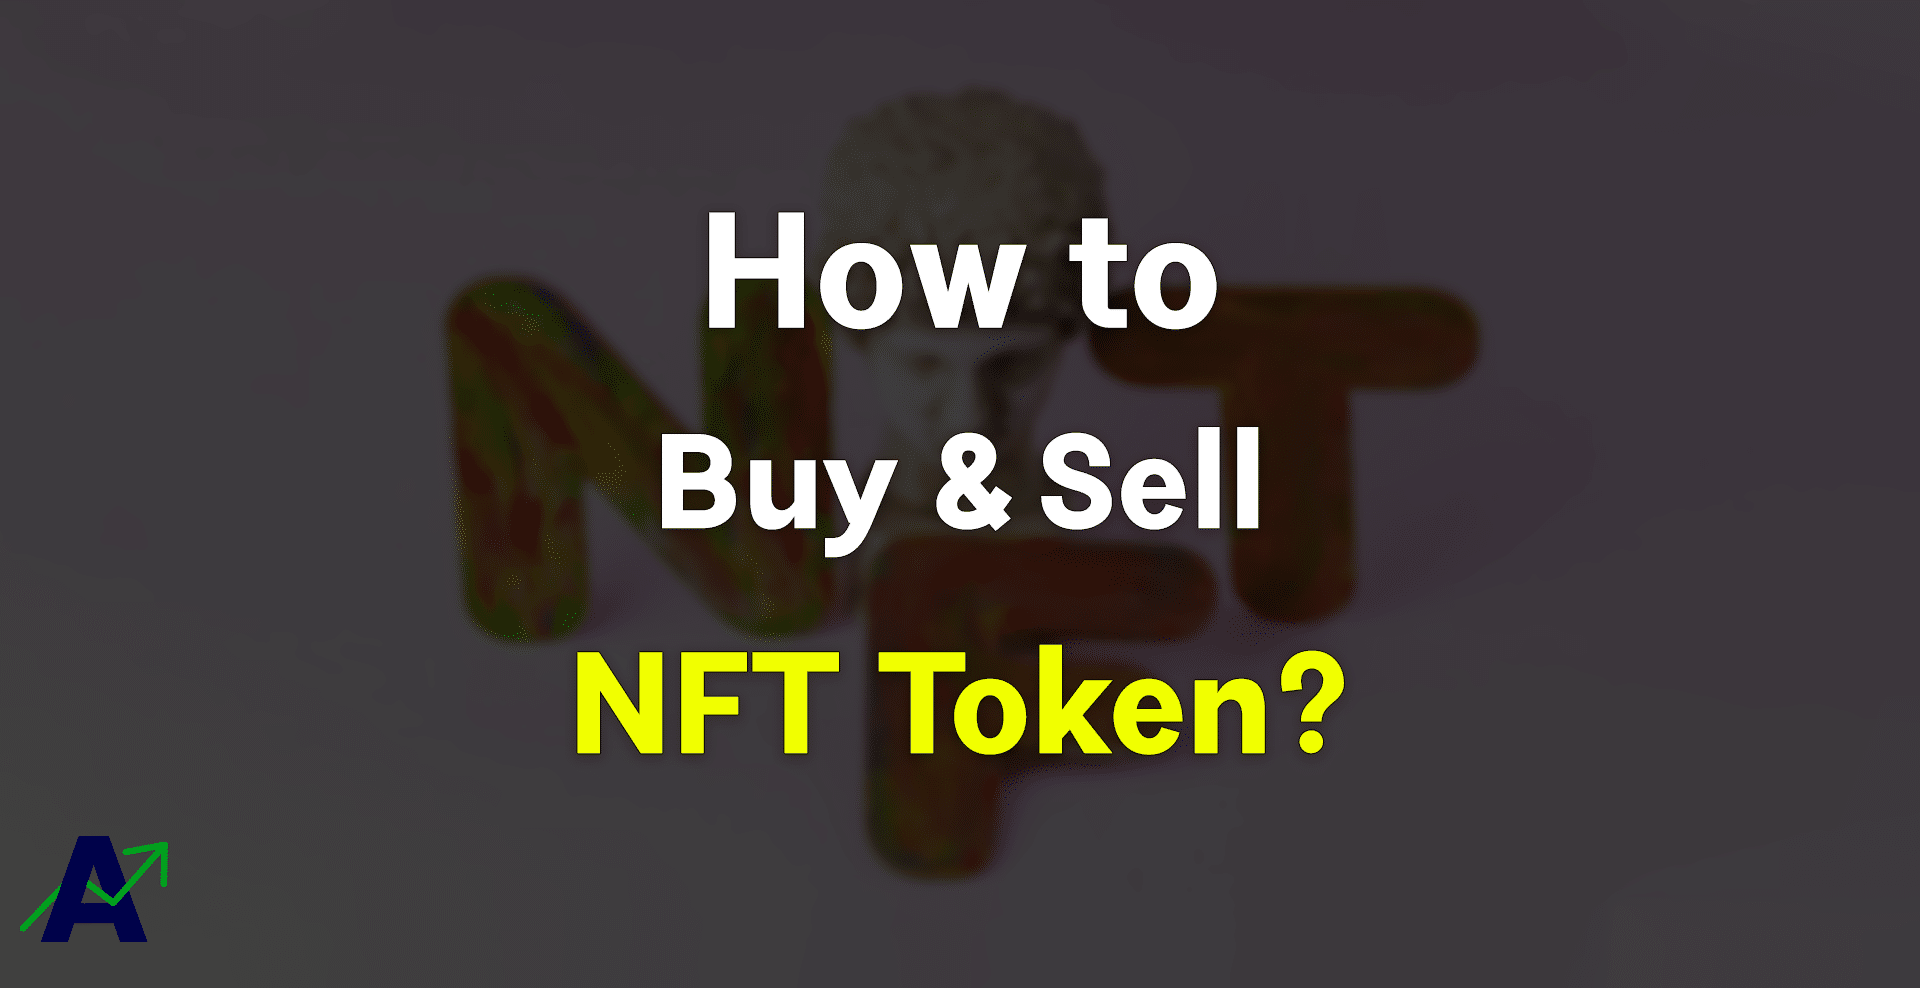 How to Buy and Sell NFT